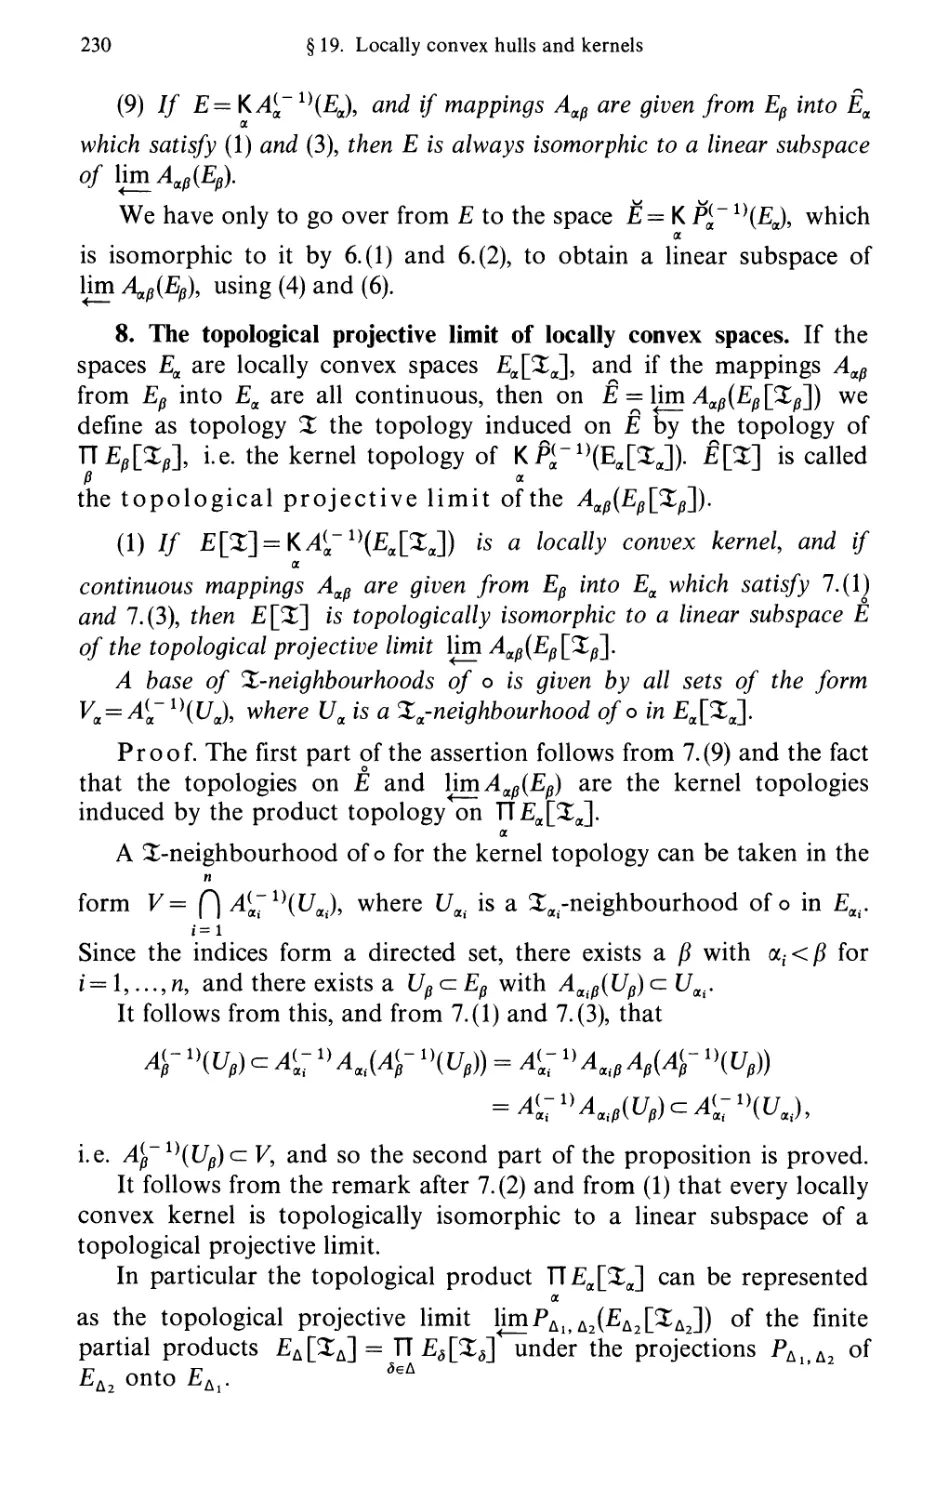 8. The topological projective limit of locally convex spaces